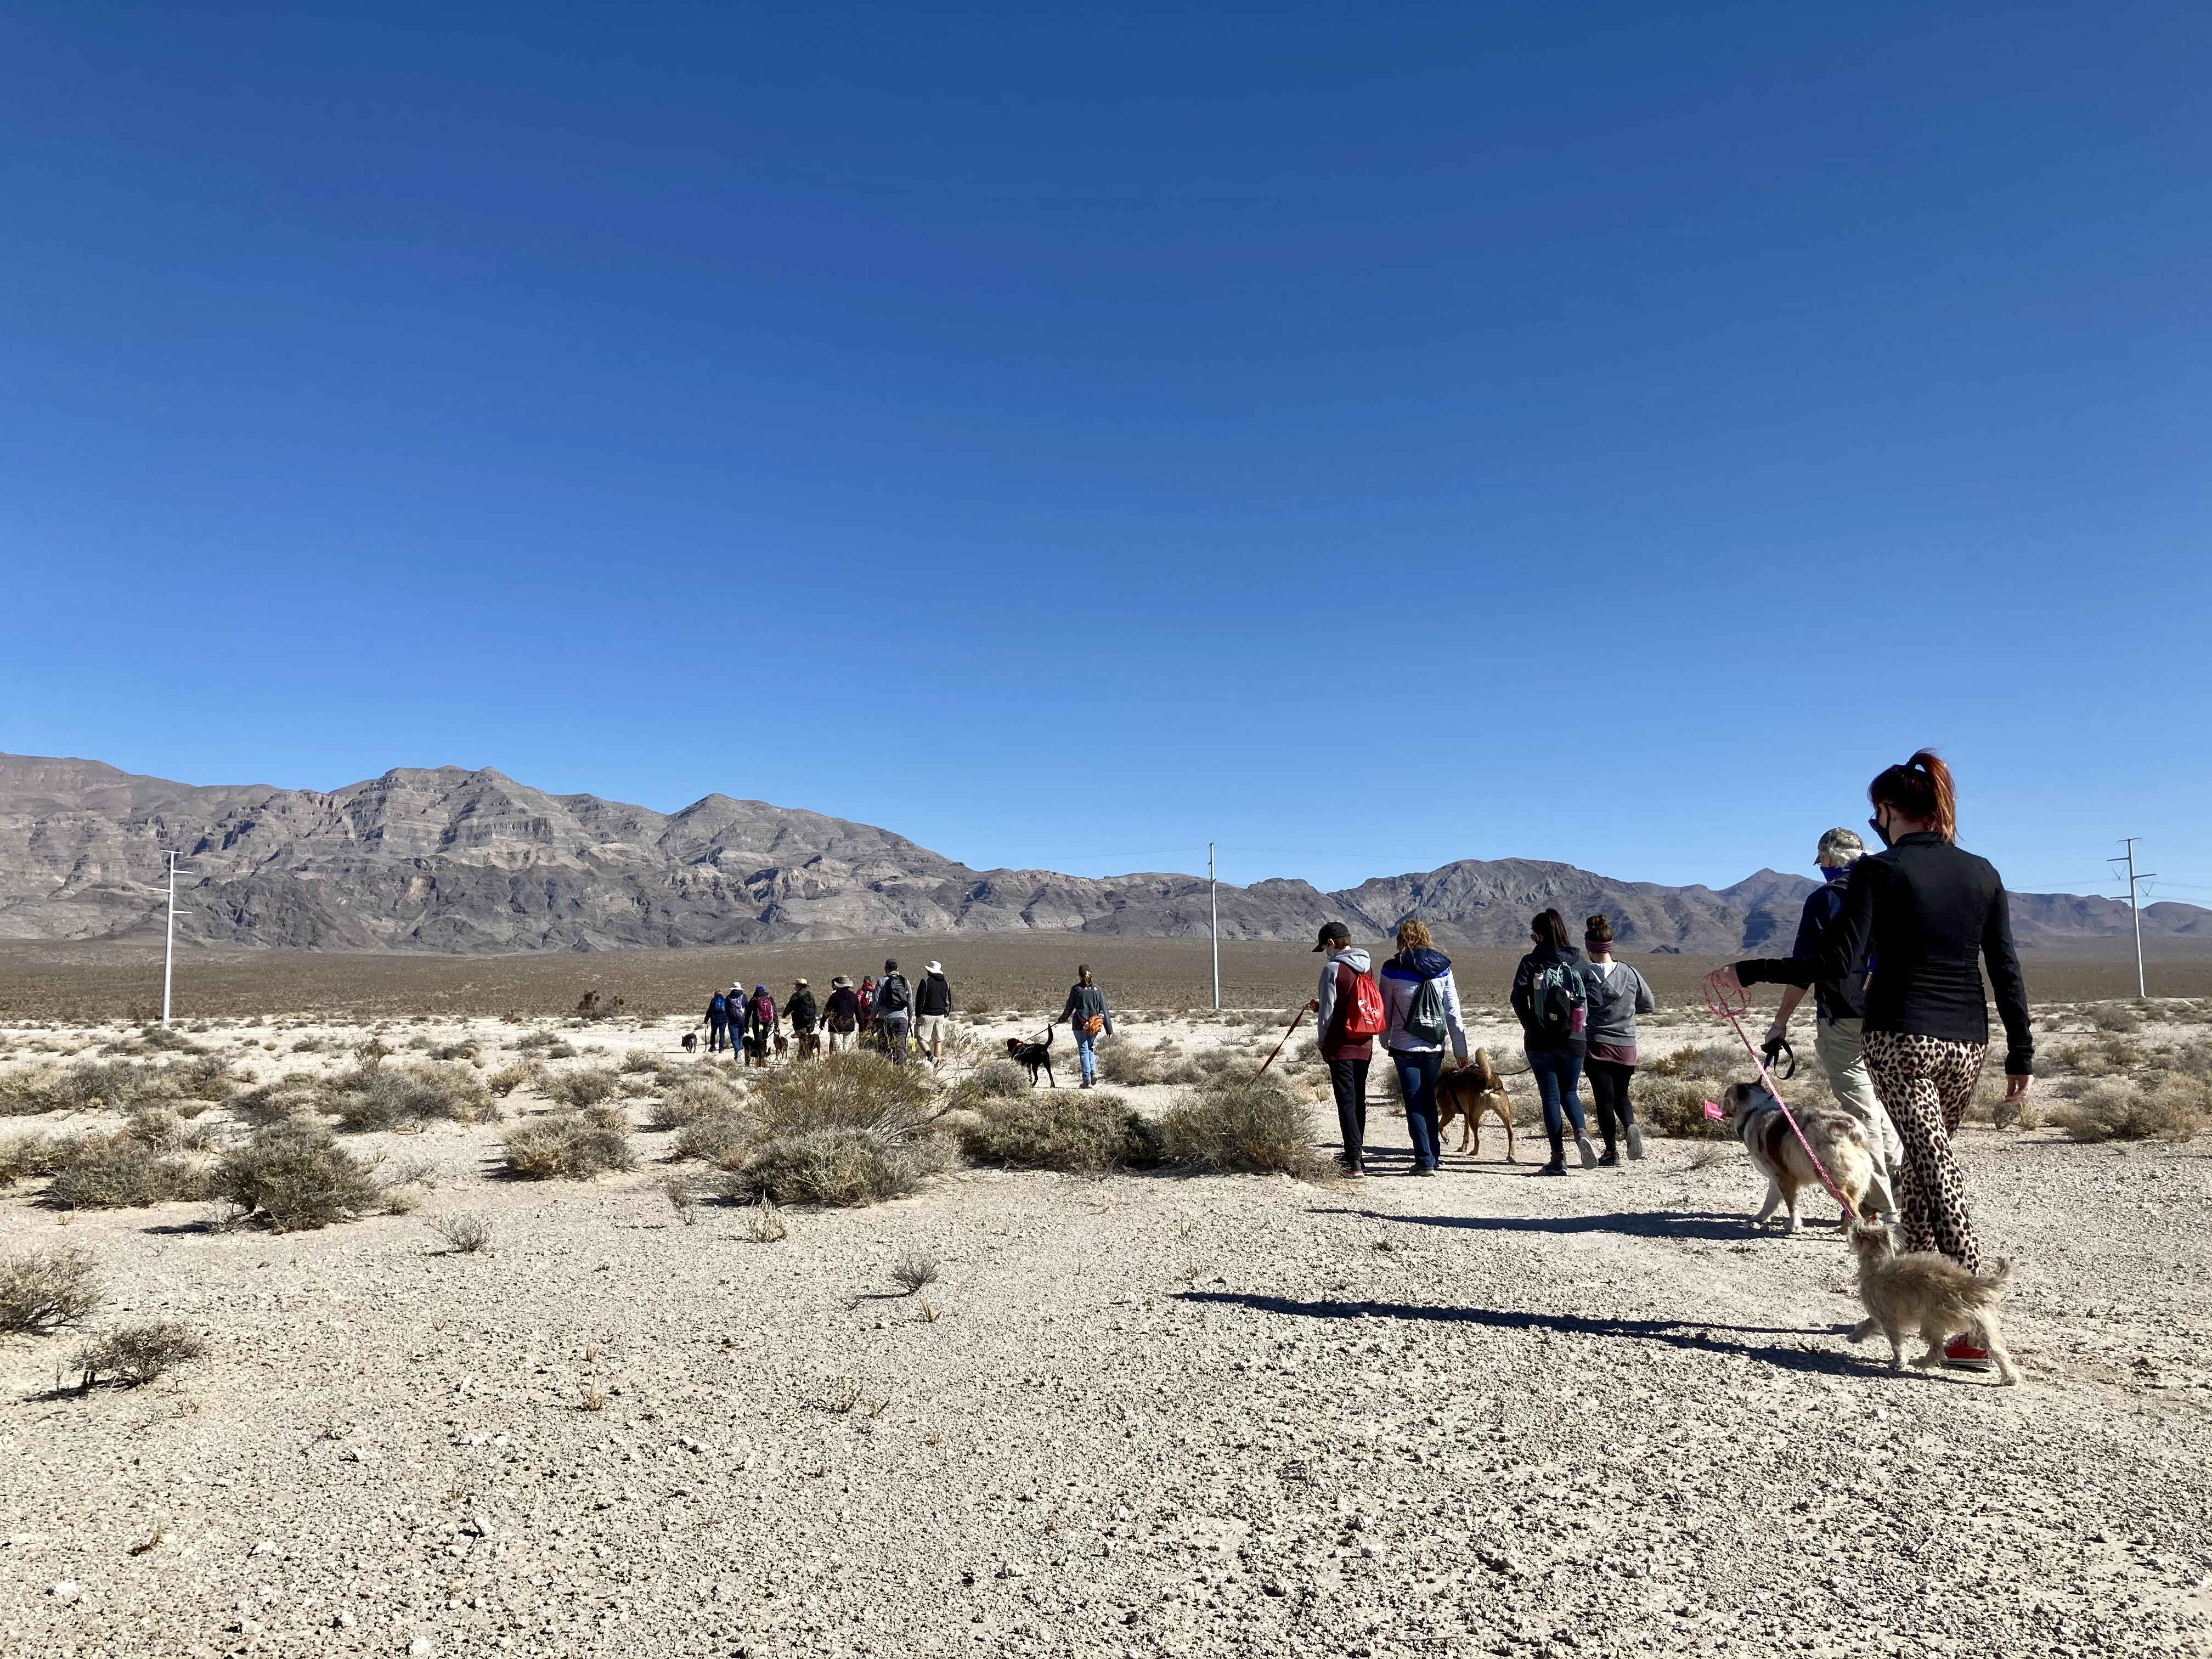 People hiking with their dogs on the Aliante Loop trail for the first Tule Springs Fossil Beds National Monument B.A.R.K. Ranger hike.